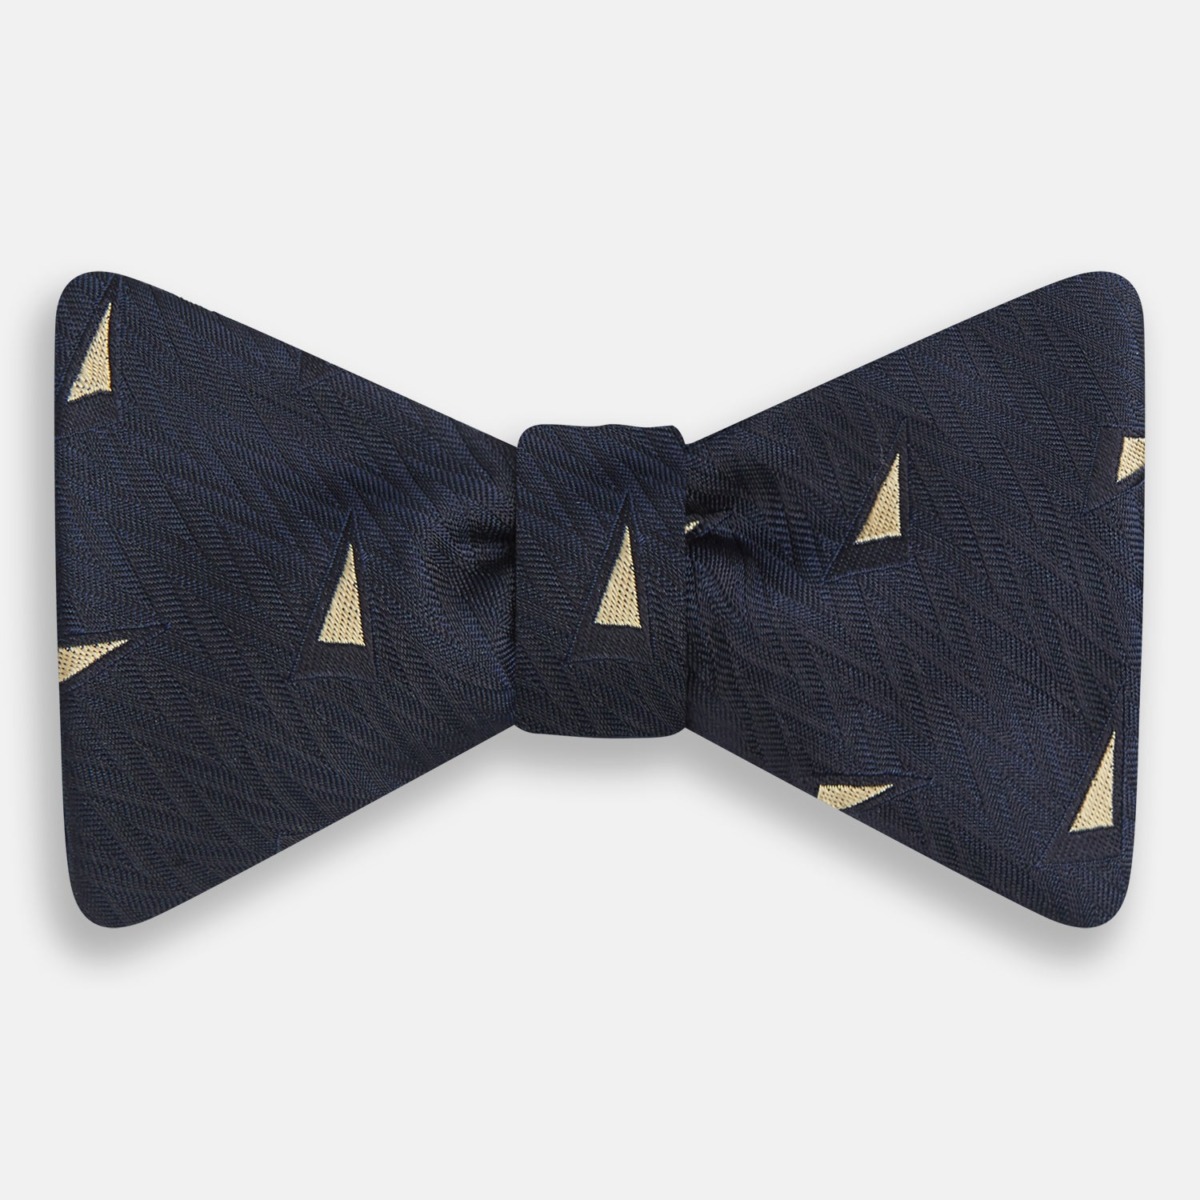 Turnbull And Asser Men's Blue Bow Tie by Turnbull & Asser GOOFASH